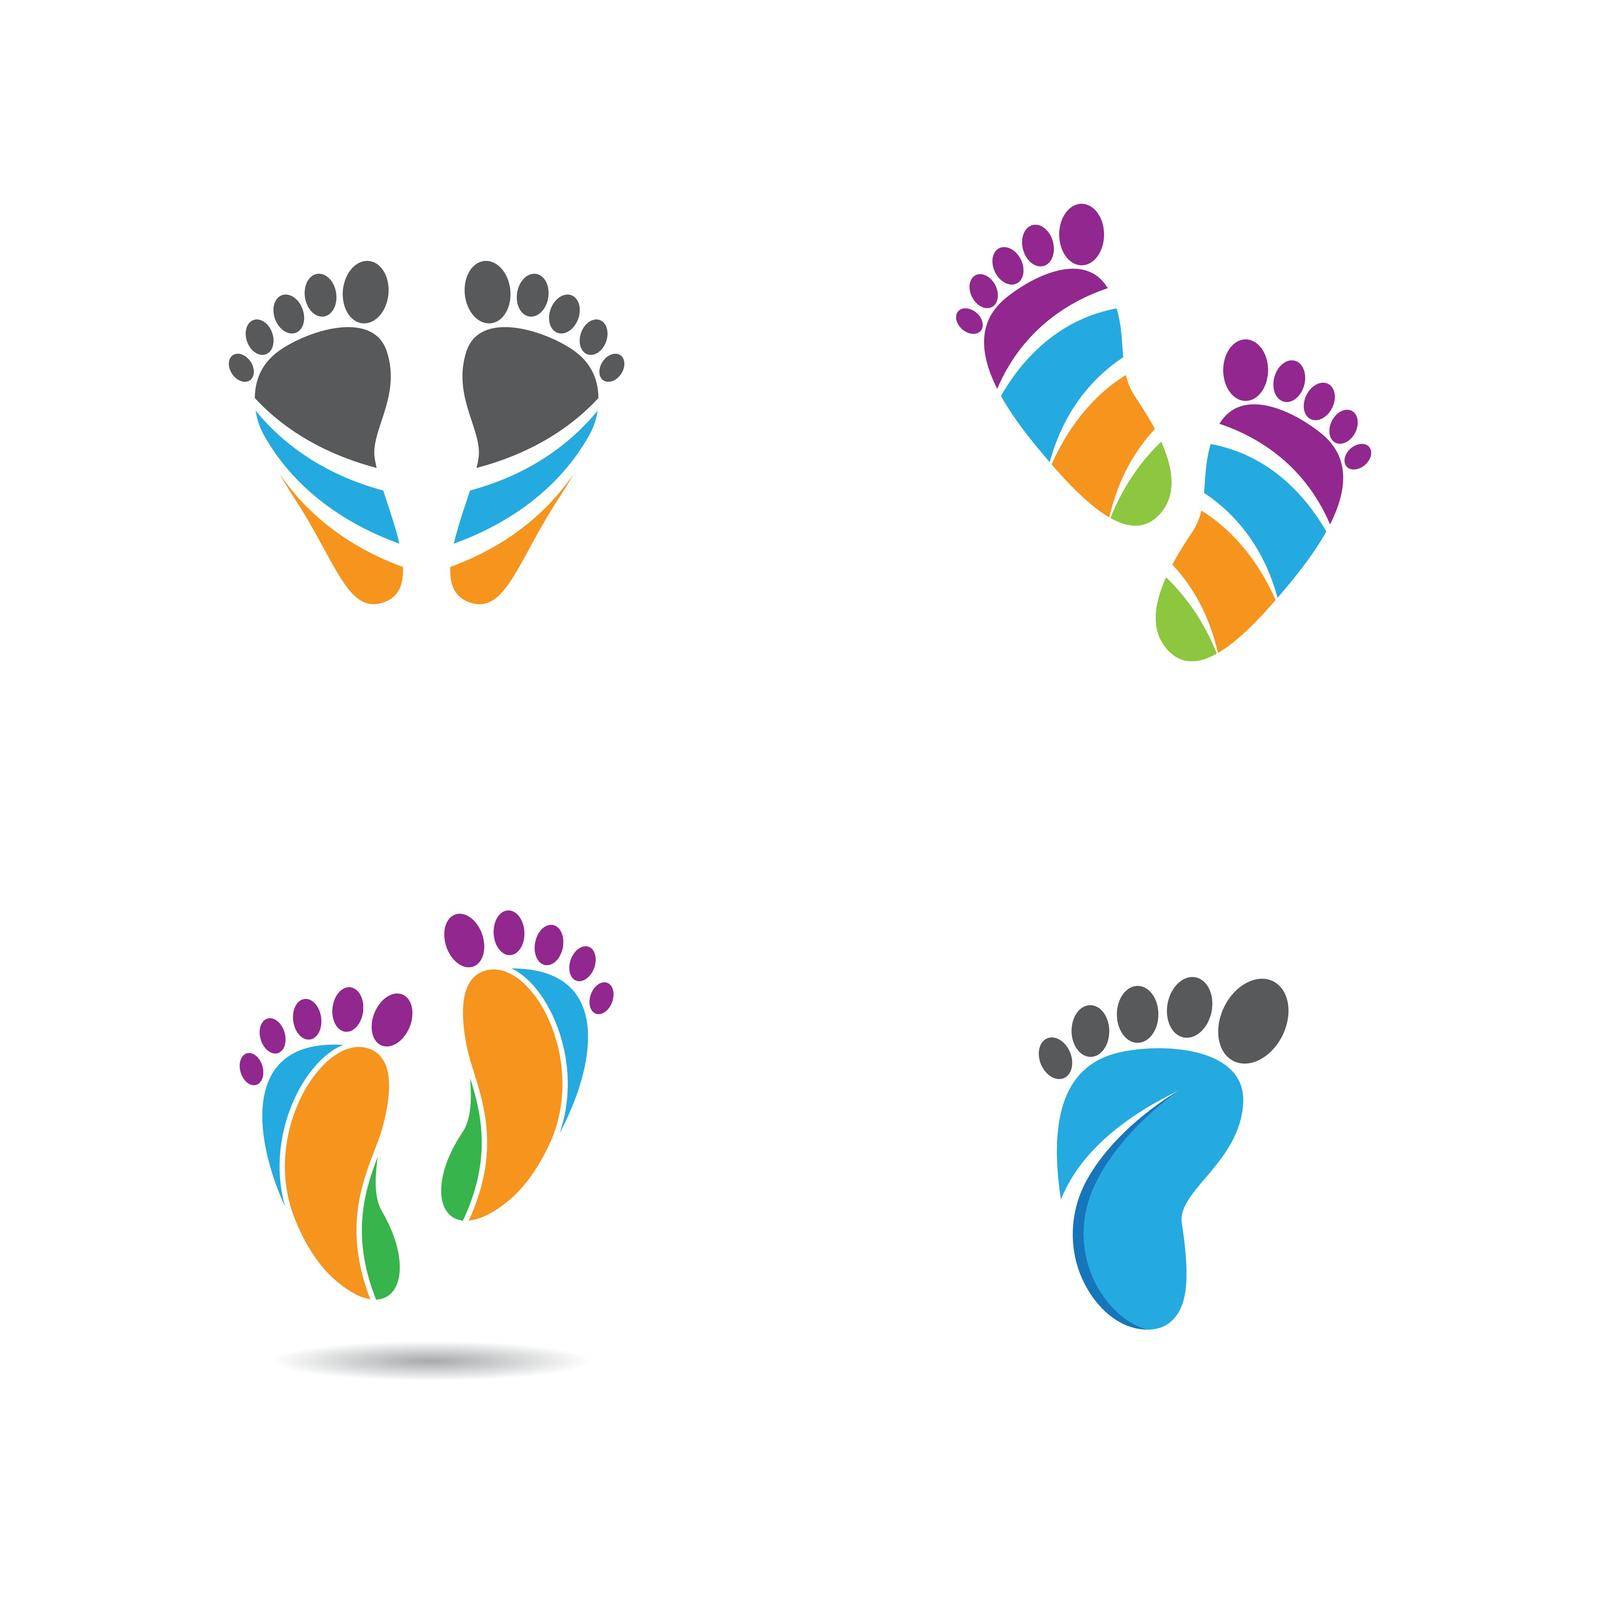 Foot therapist logo vector icon by Attades19